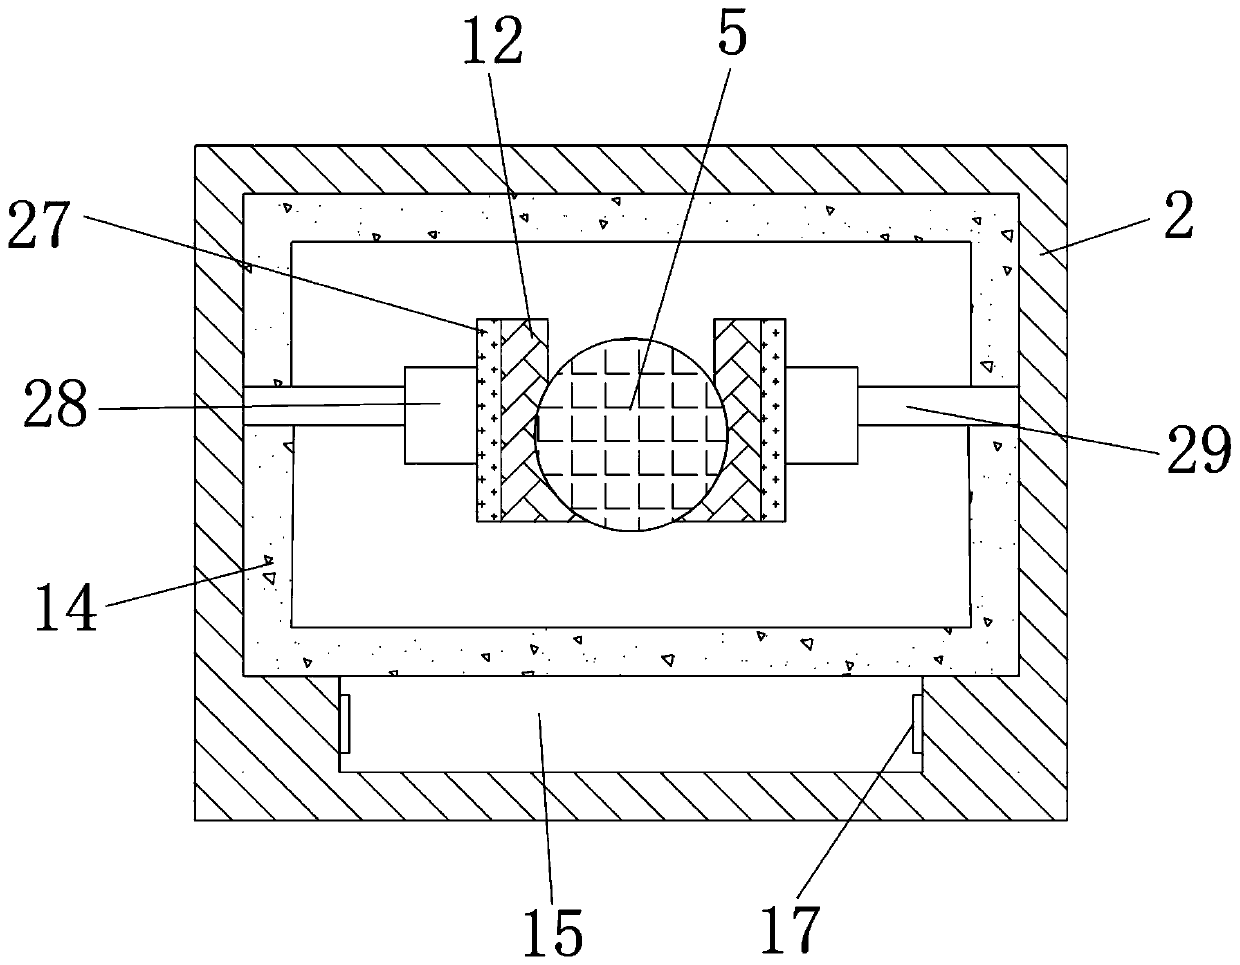 Heat treatment device for ultra-long aluminum alloy extruded profile